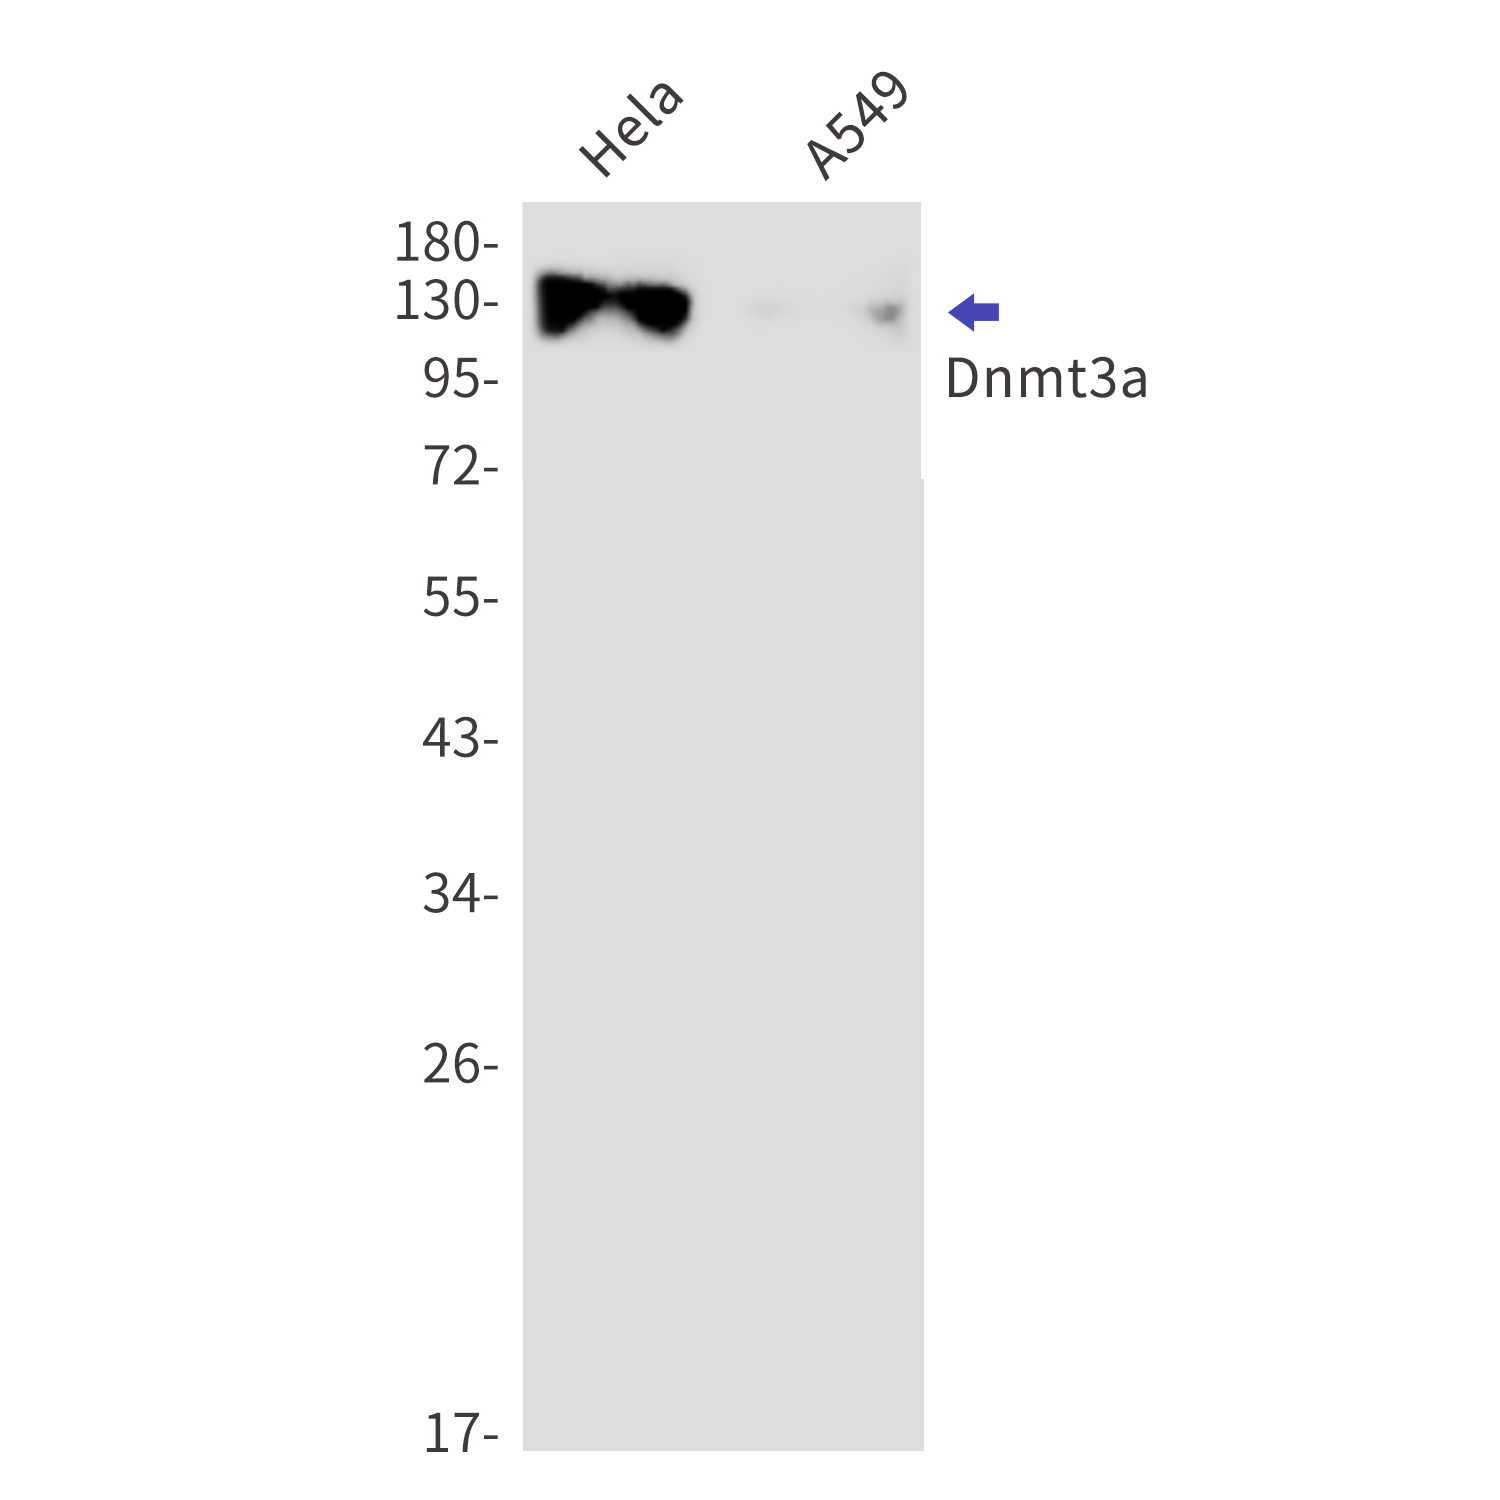 Western blot detection of Dnmt3a in Hela,A549 cell lysates using Dnmt3a Rabbit mAb(1:1000 diluted).Predicted band size:102kDa.Observed band size:130kDa.